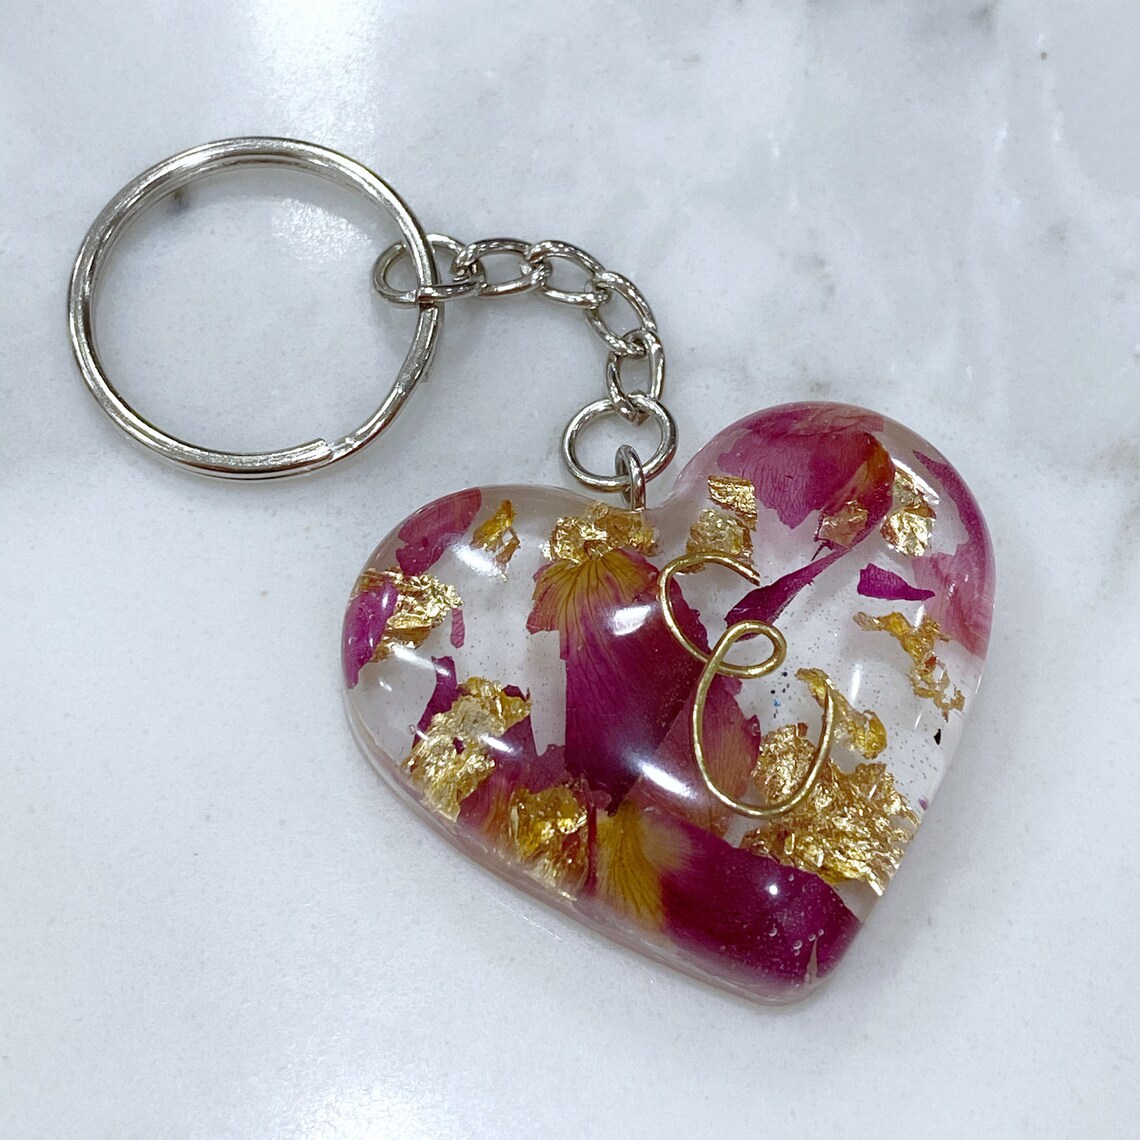 Resin Heart Keychains May be Personalized with Hand-made | Etsy